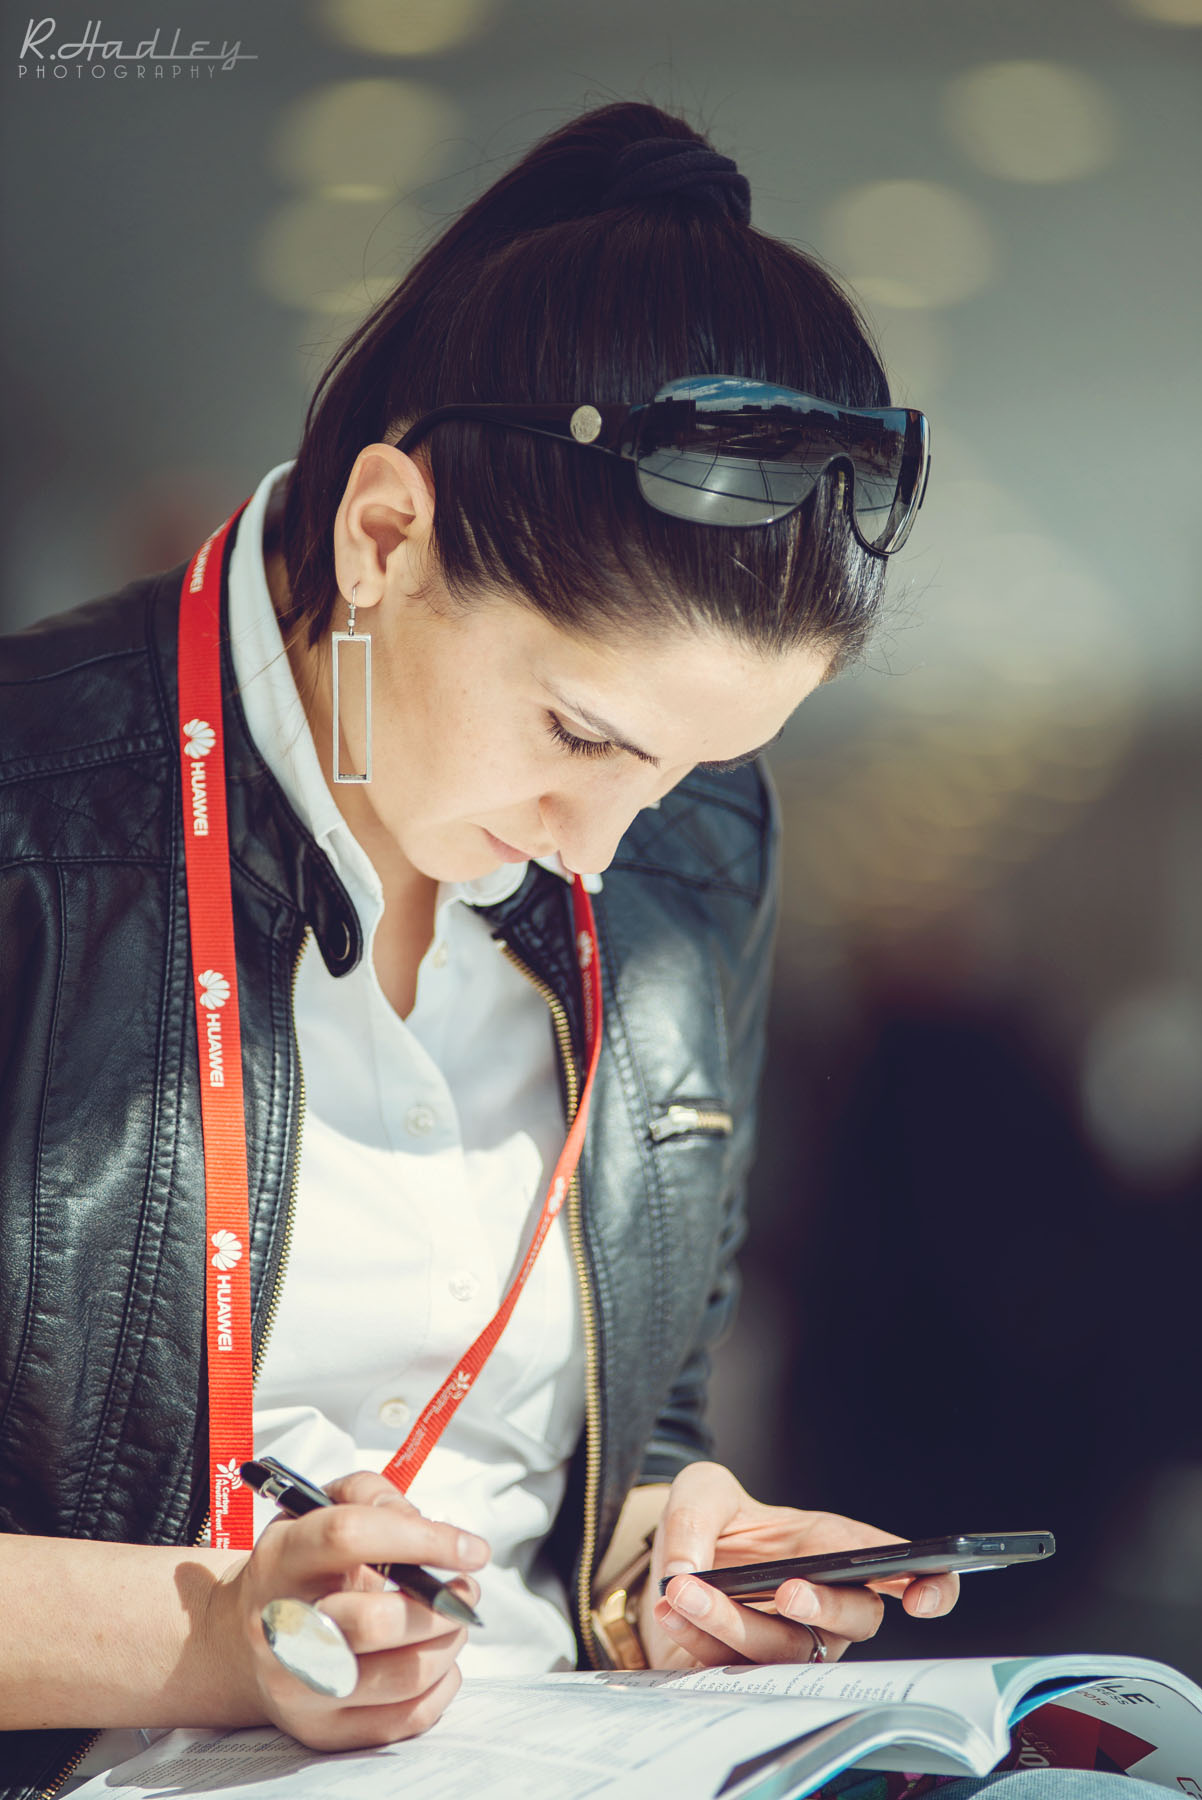 Event photography at MWC - Mobile World Congress in Barcelona